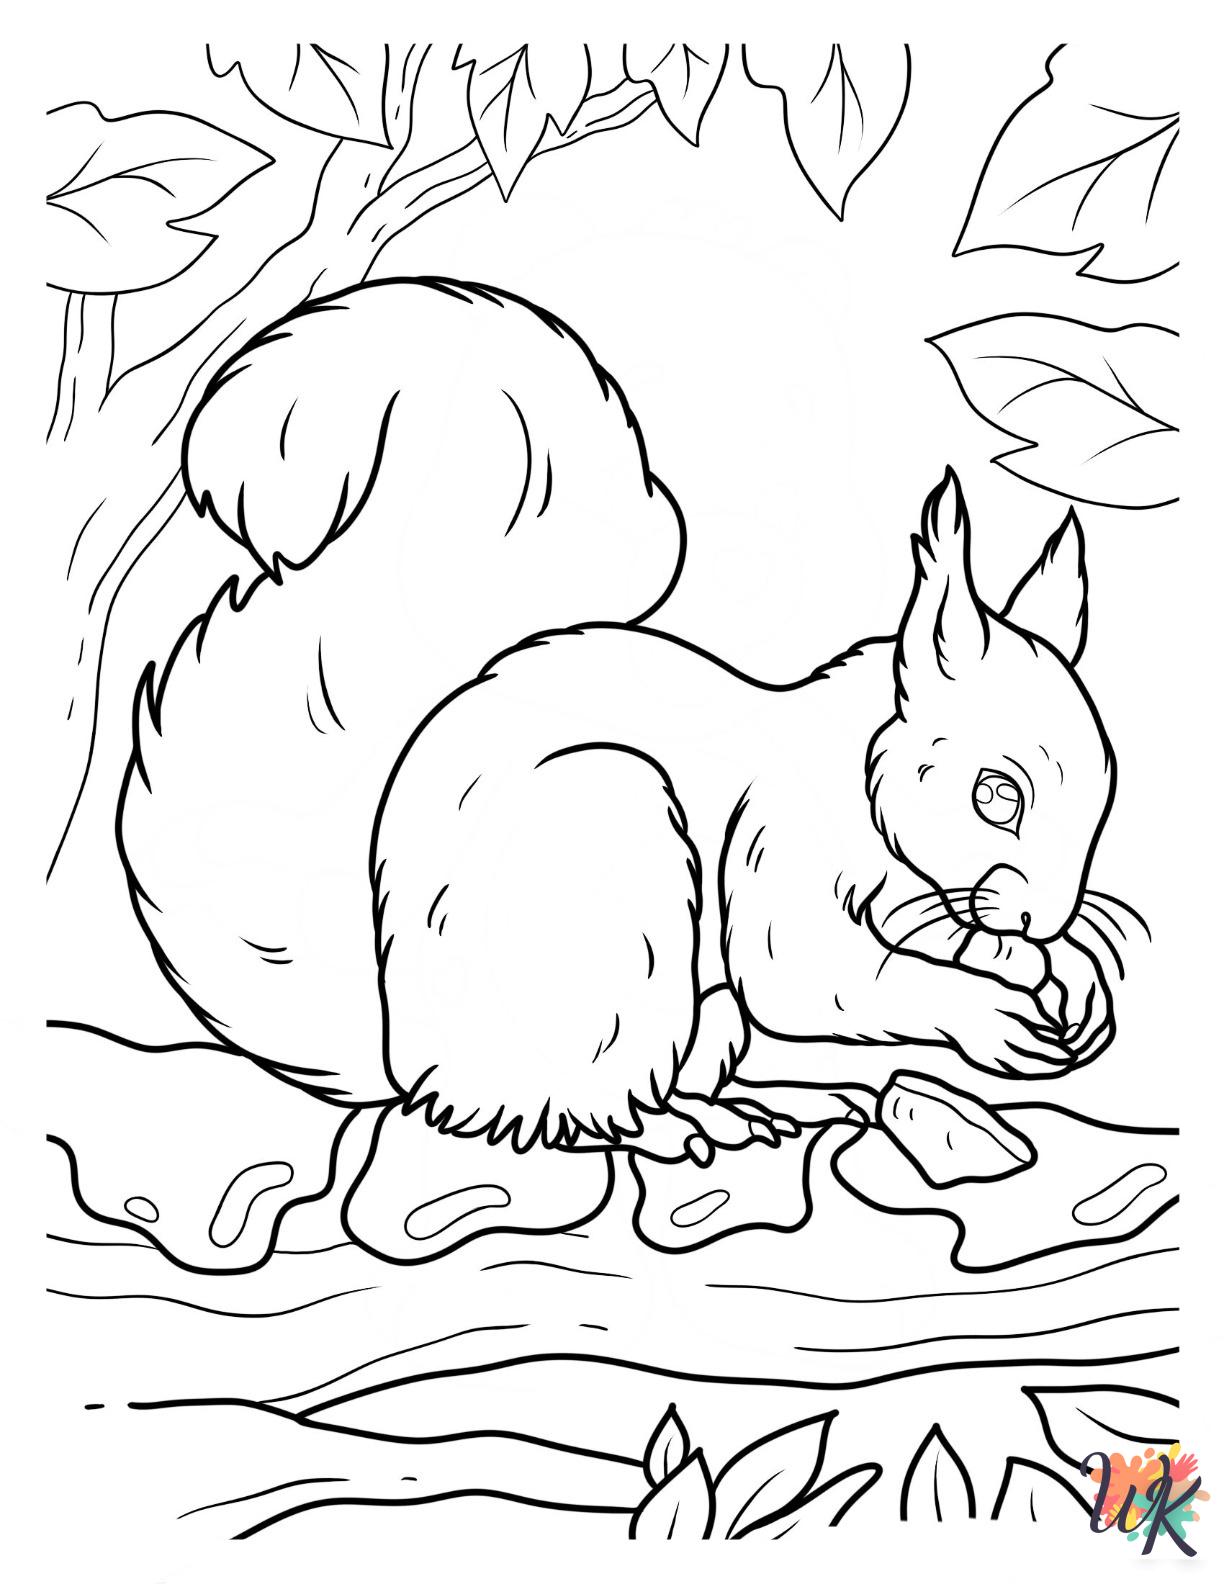 Squirrel coloring pages grinch